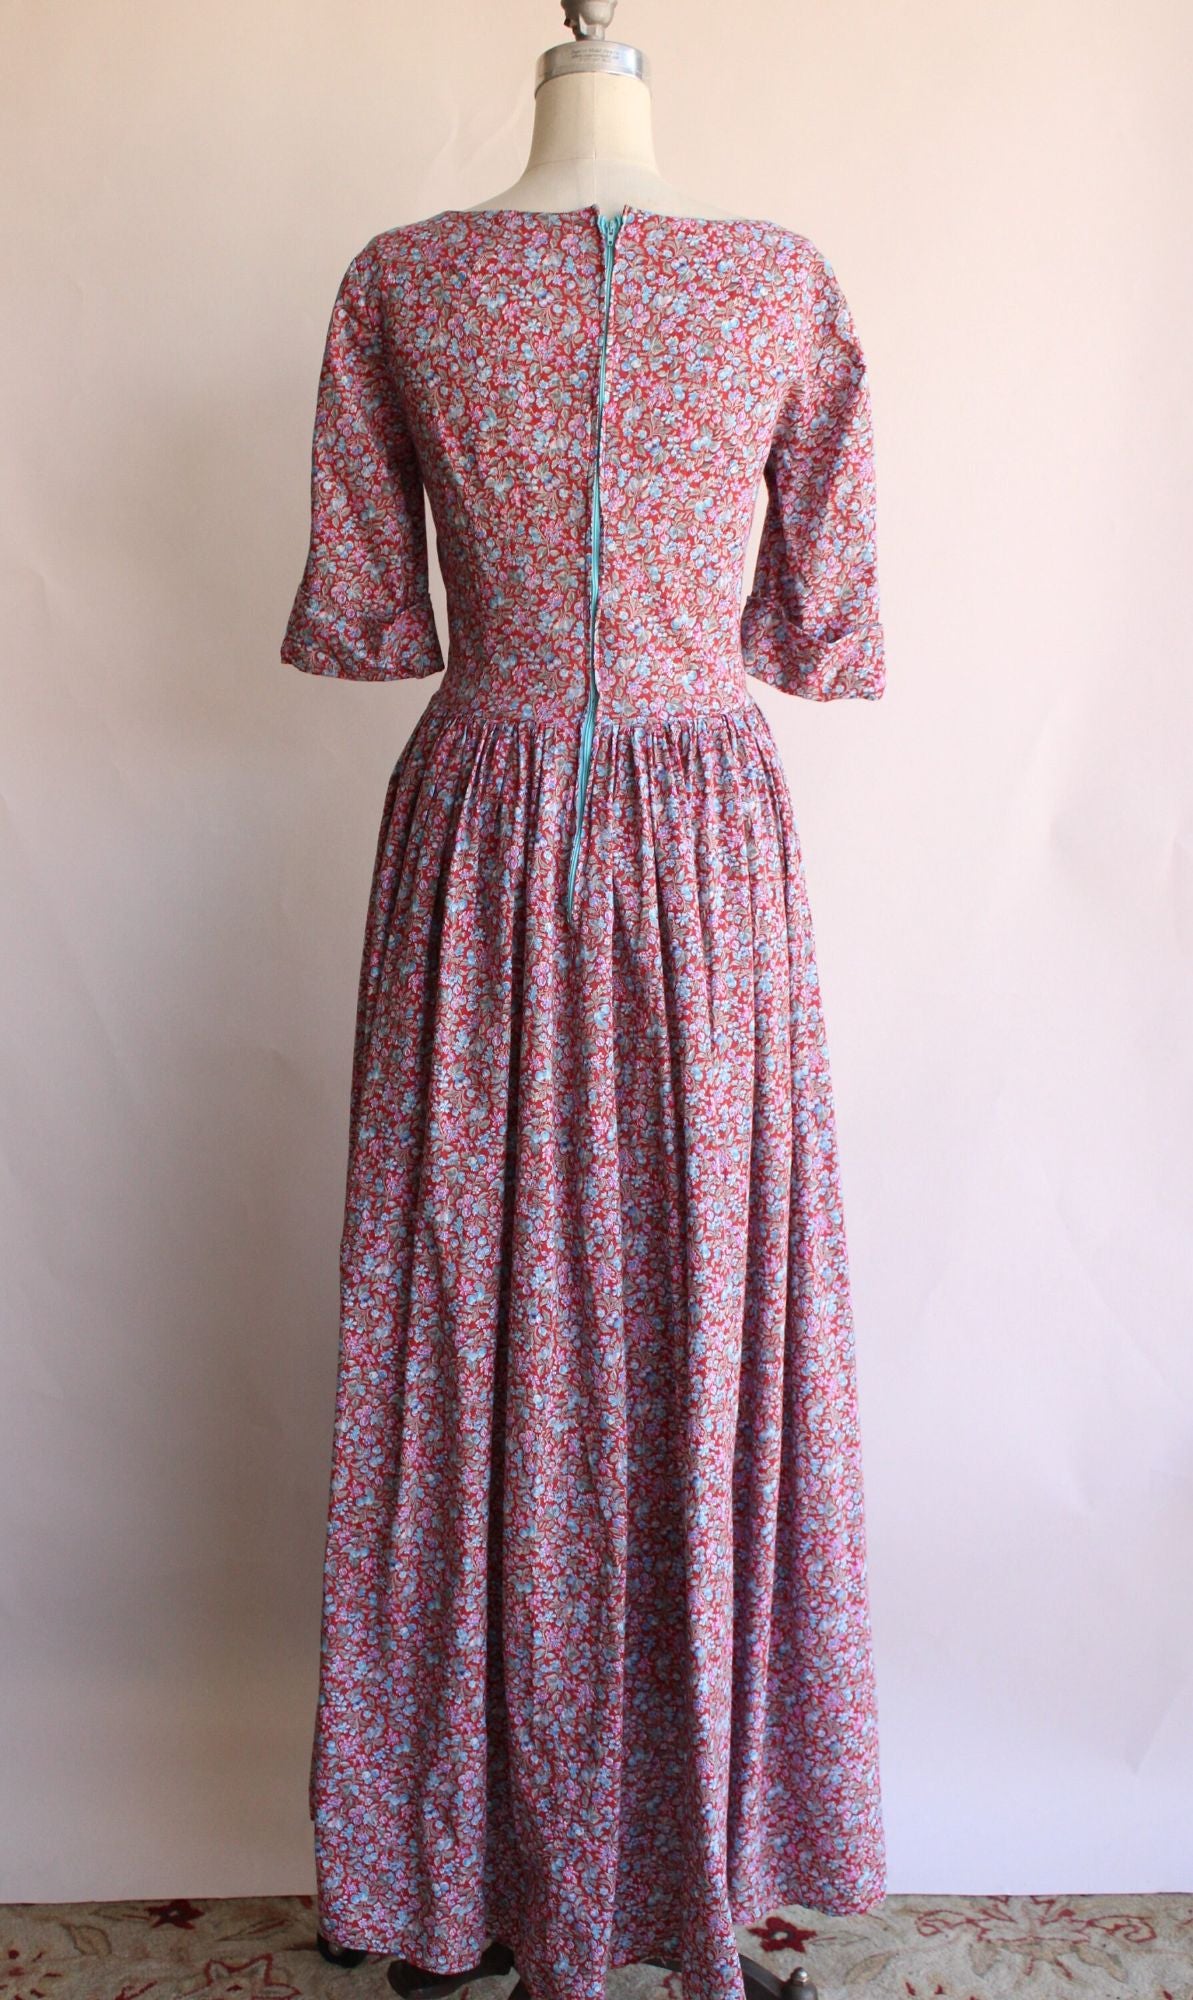 Vintage 1970s 1980s Victorian Day Dress Costume